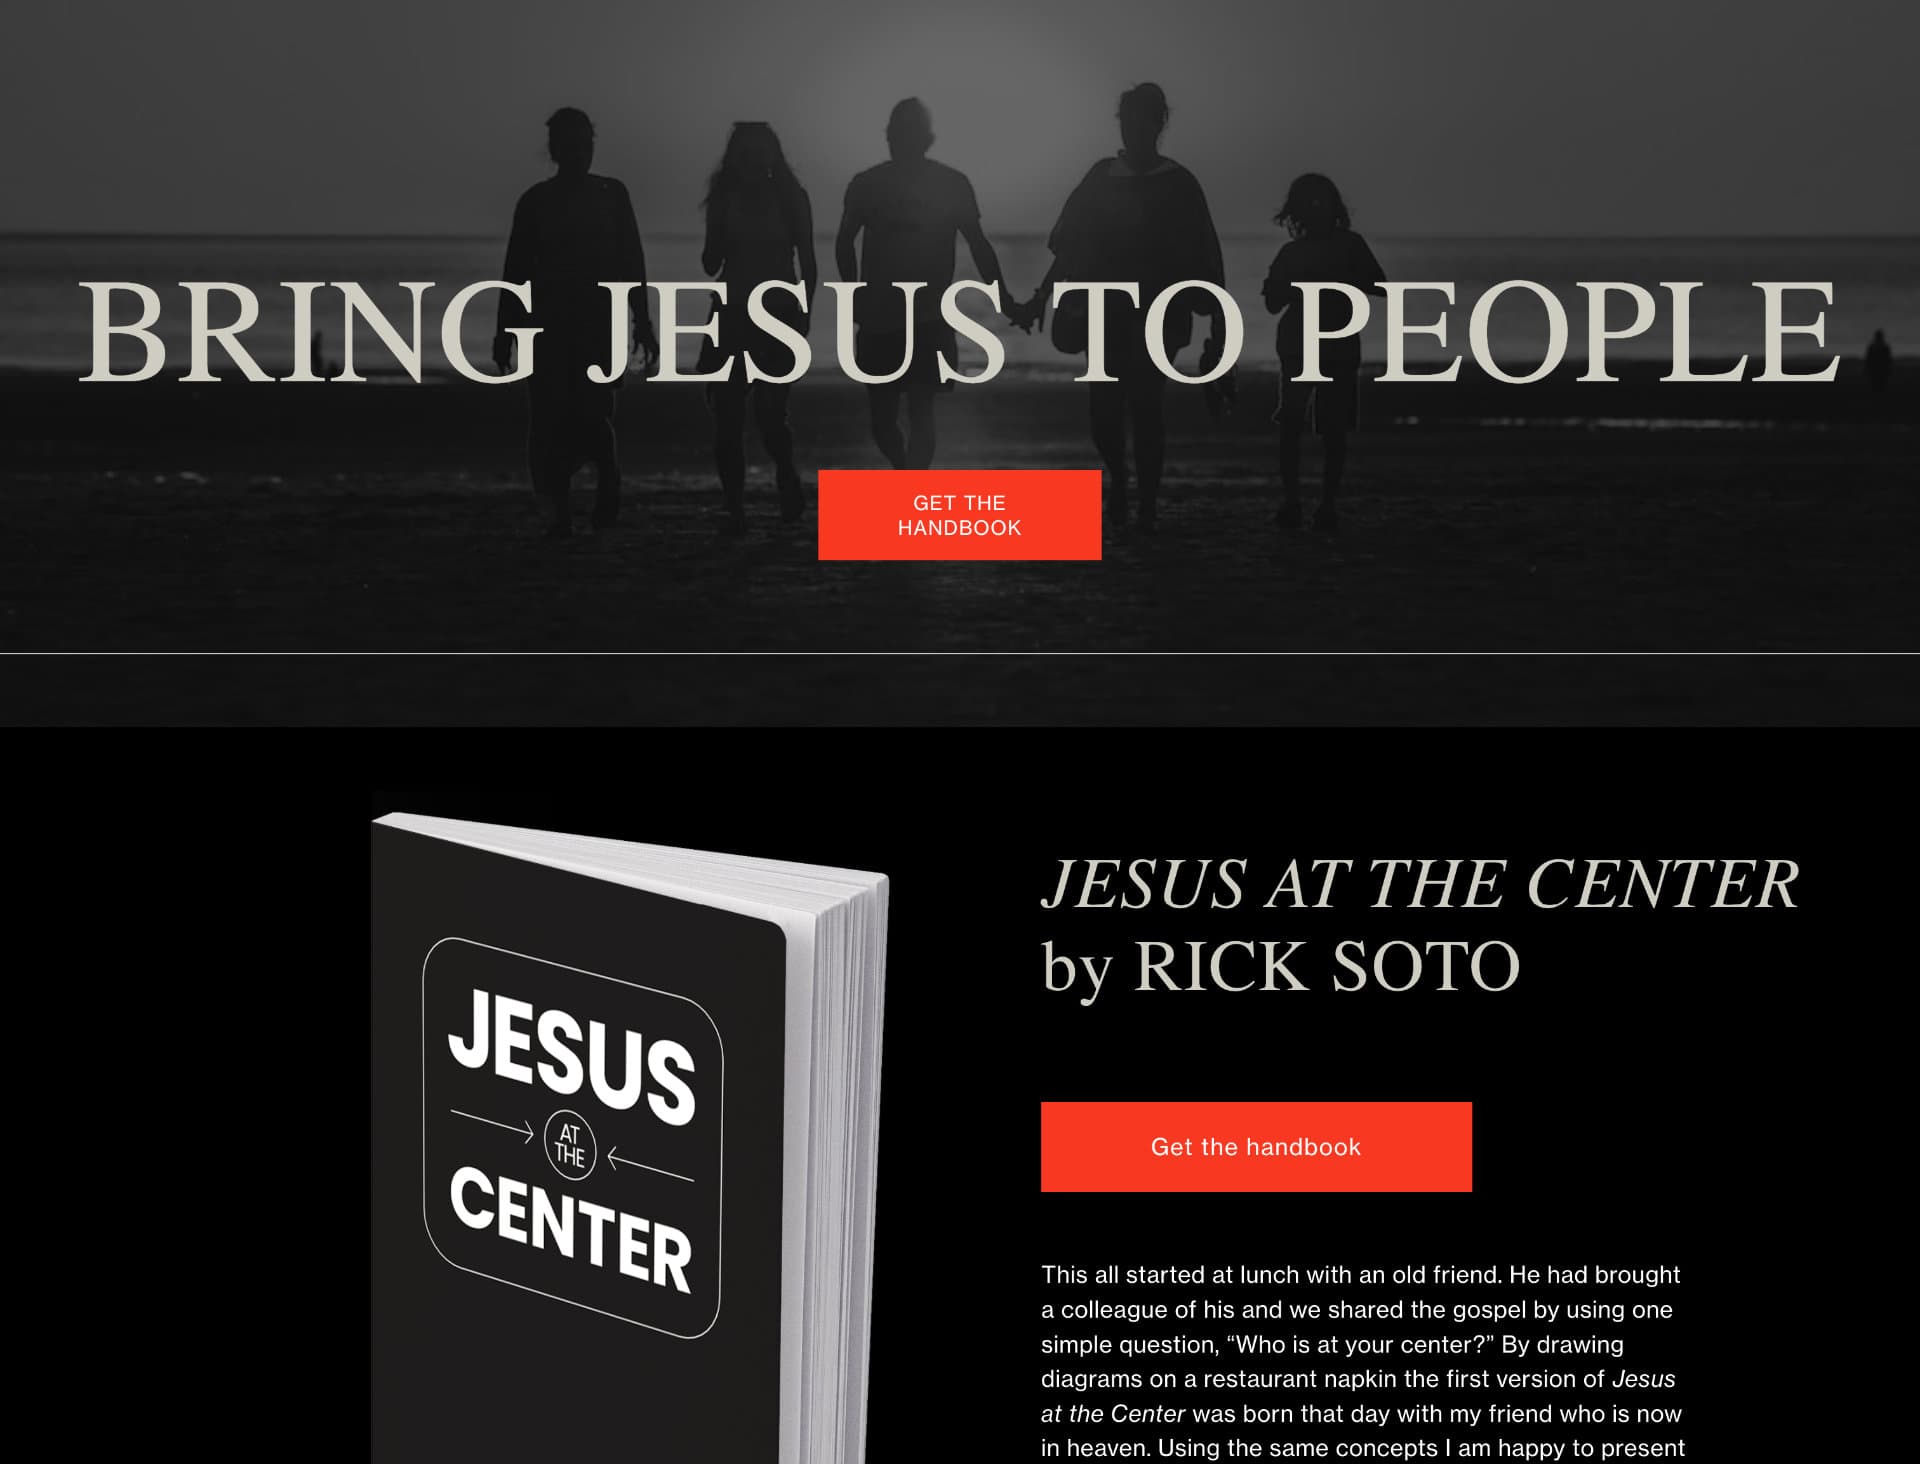 Jesus at the Center